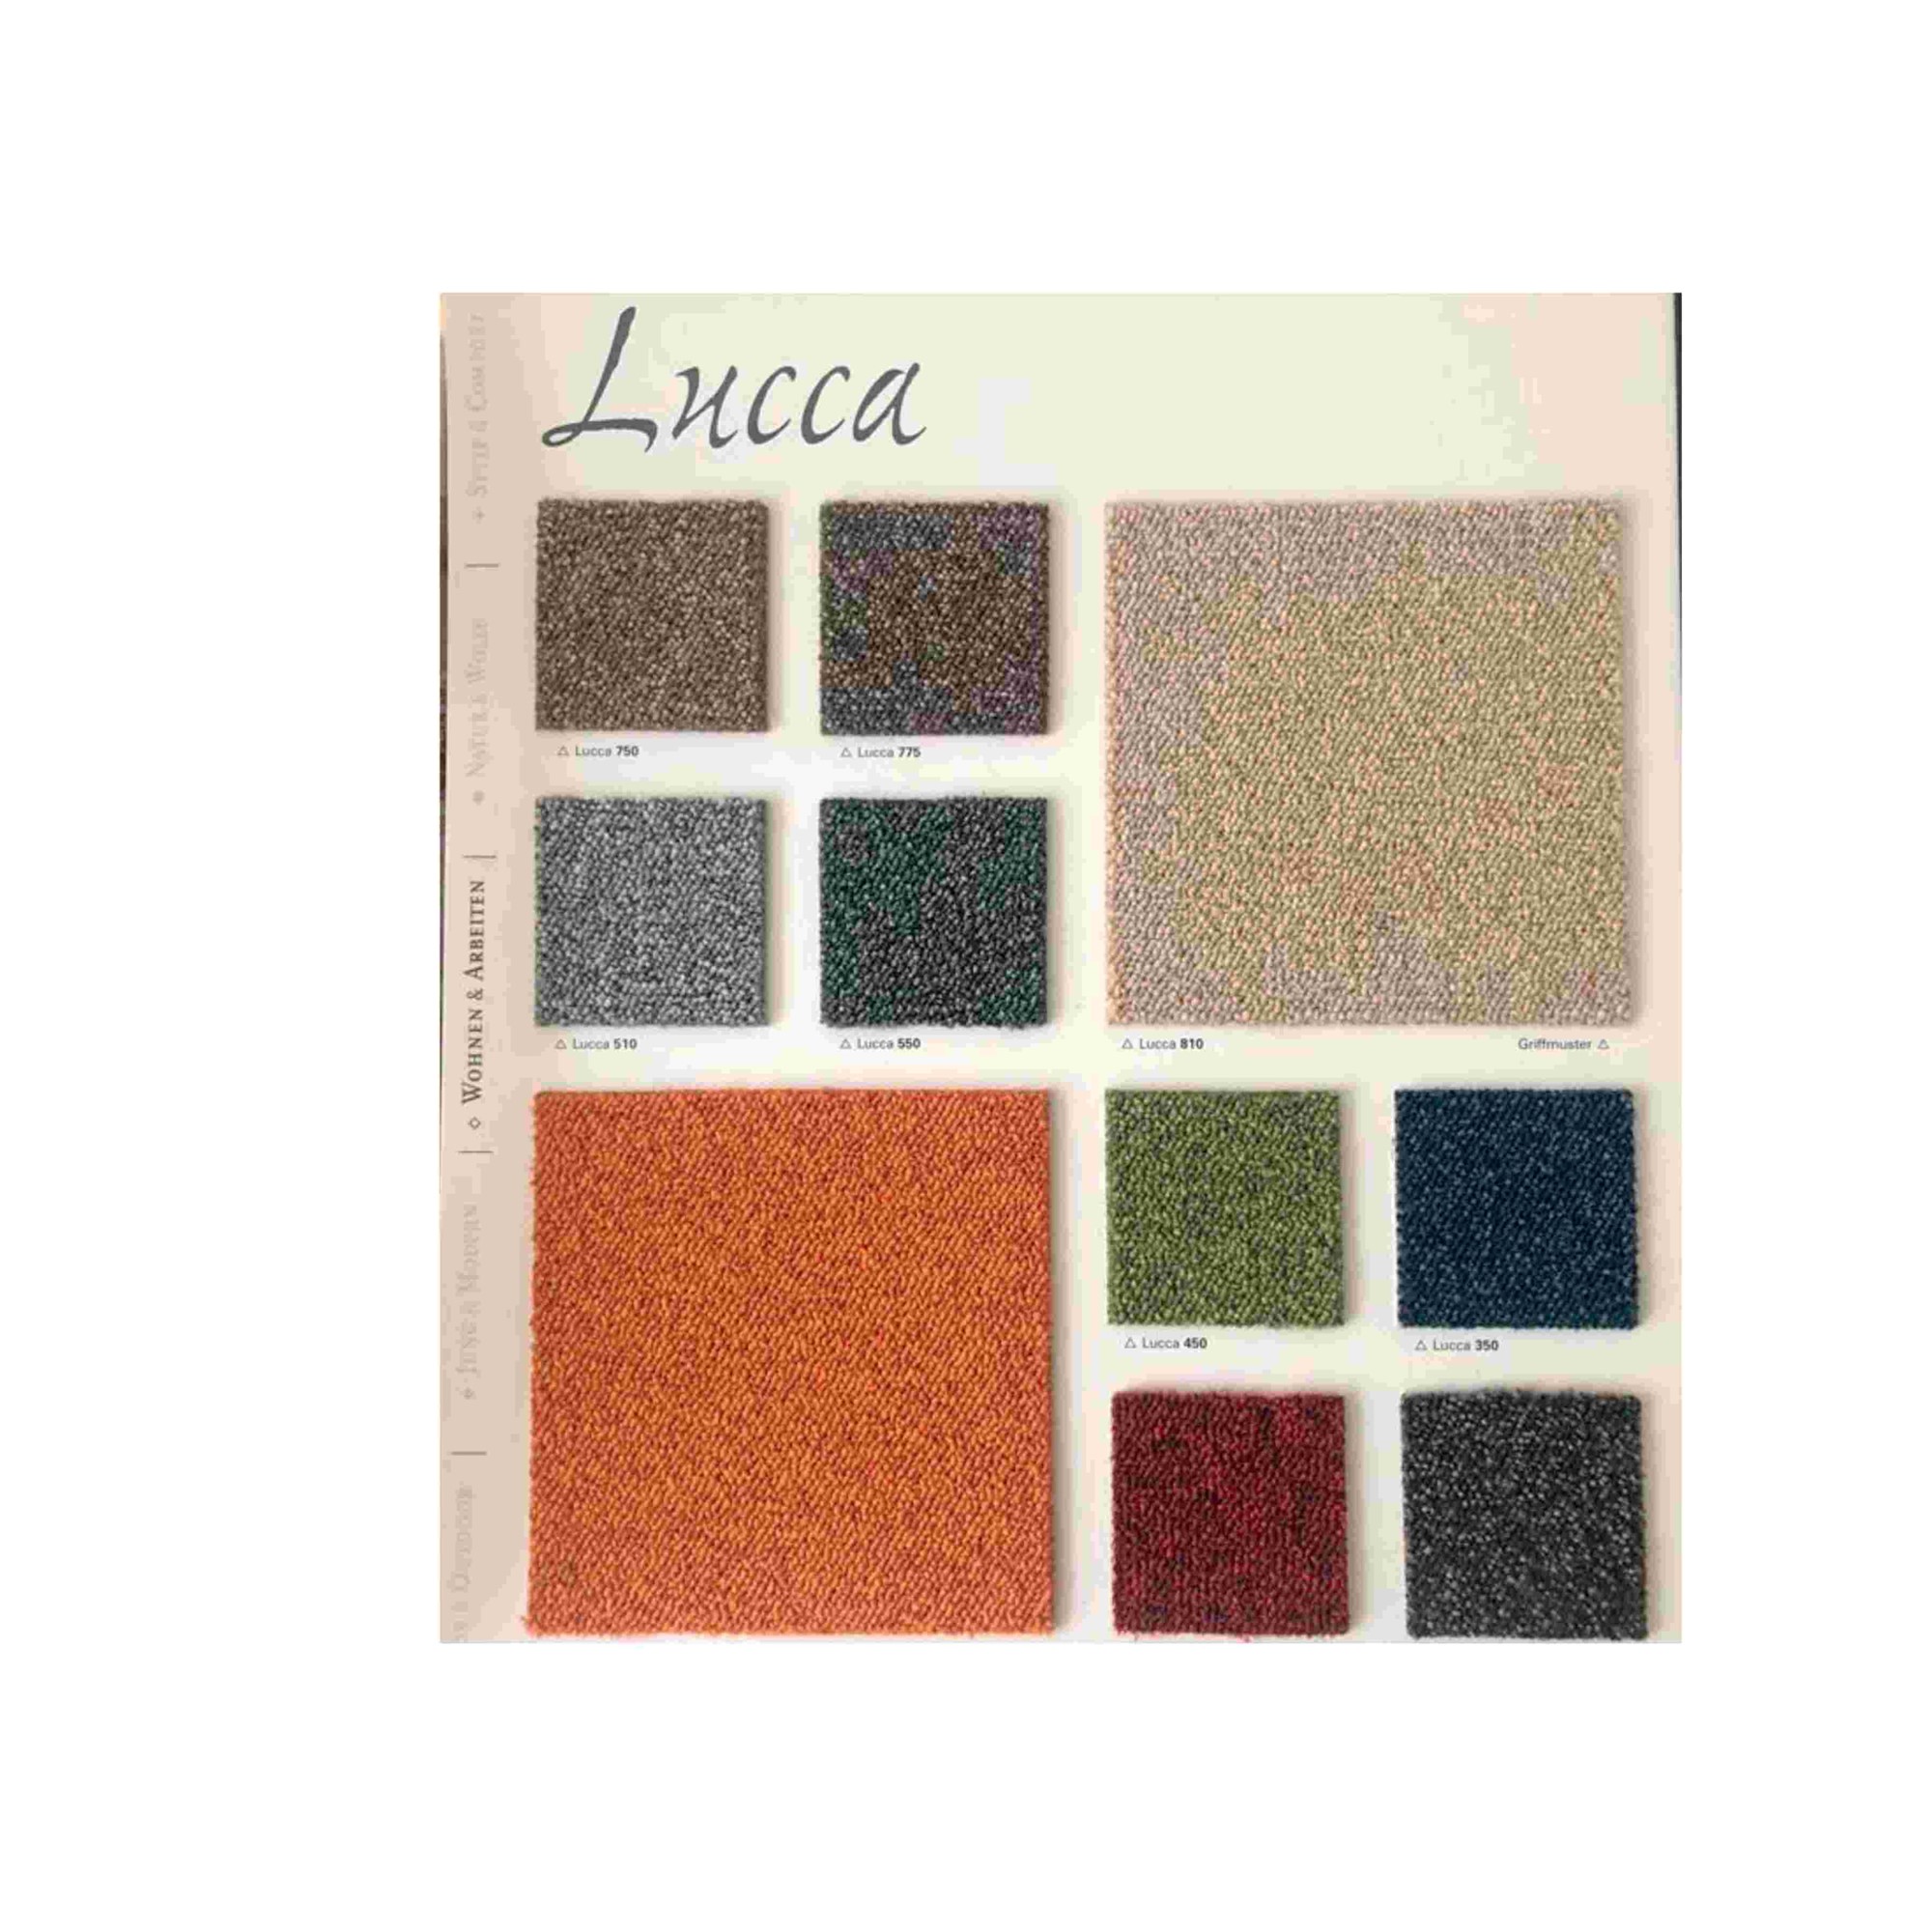 Teppich LUCCA Farbmuster